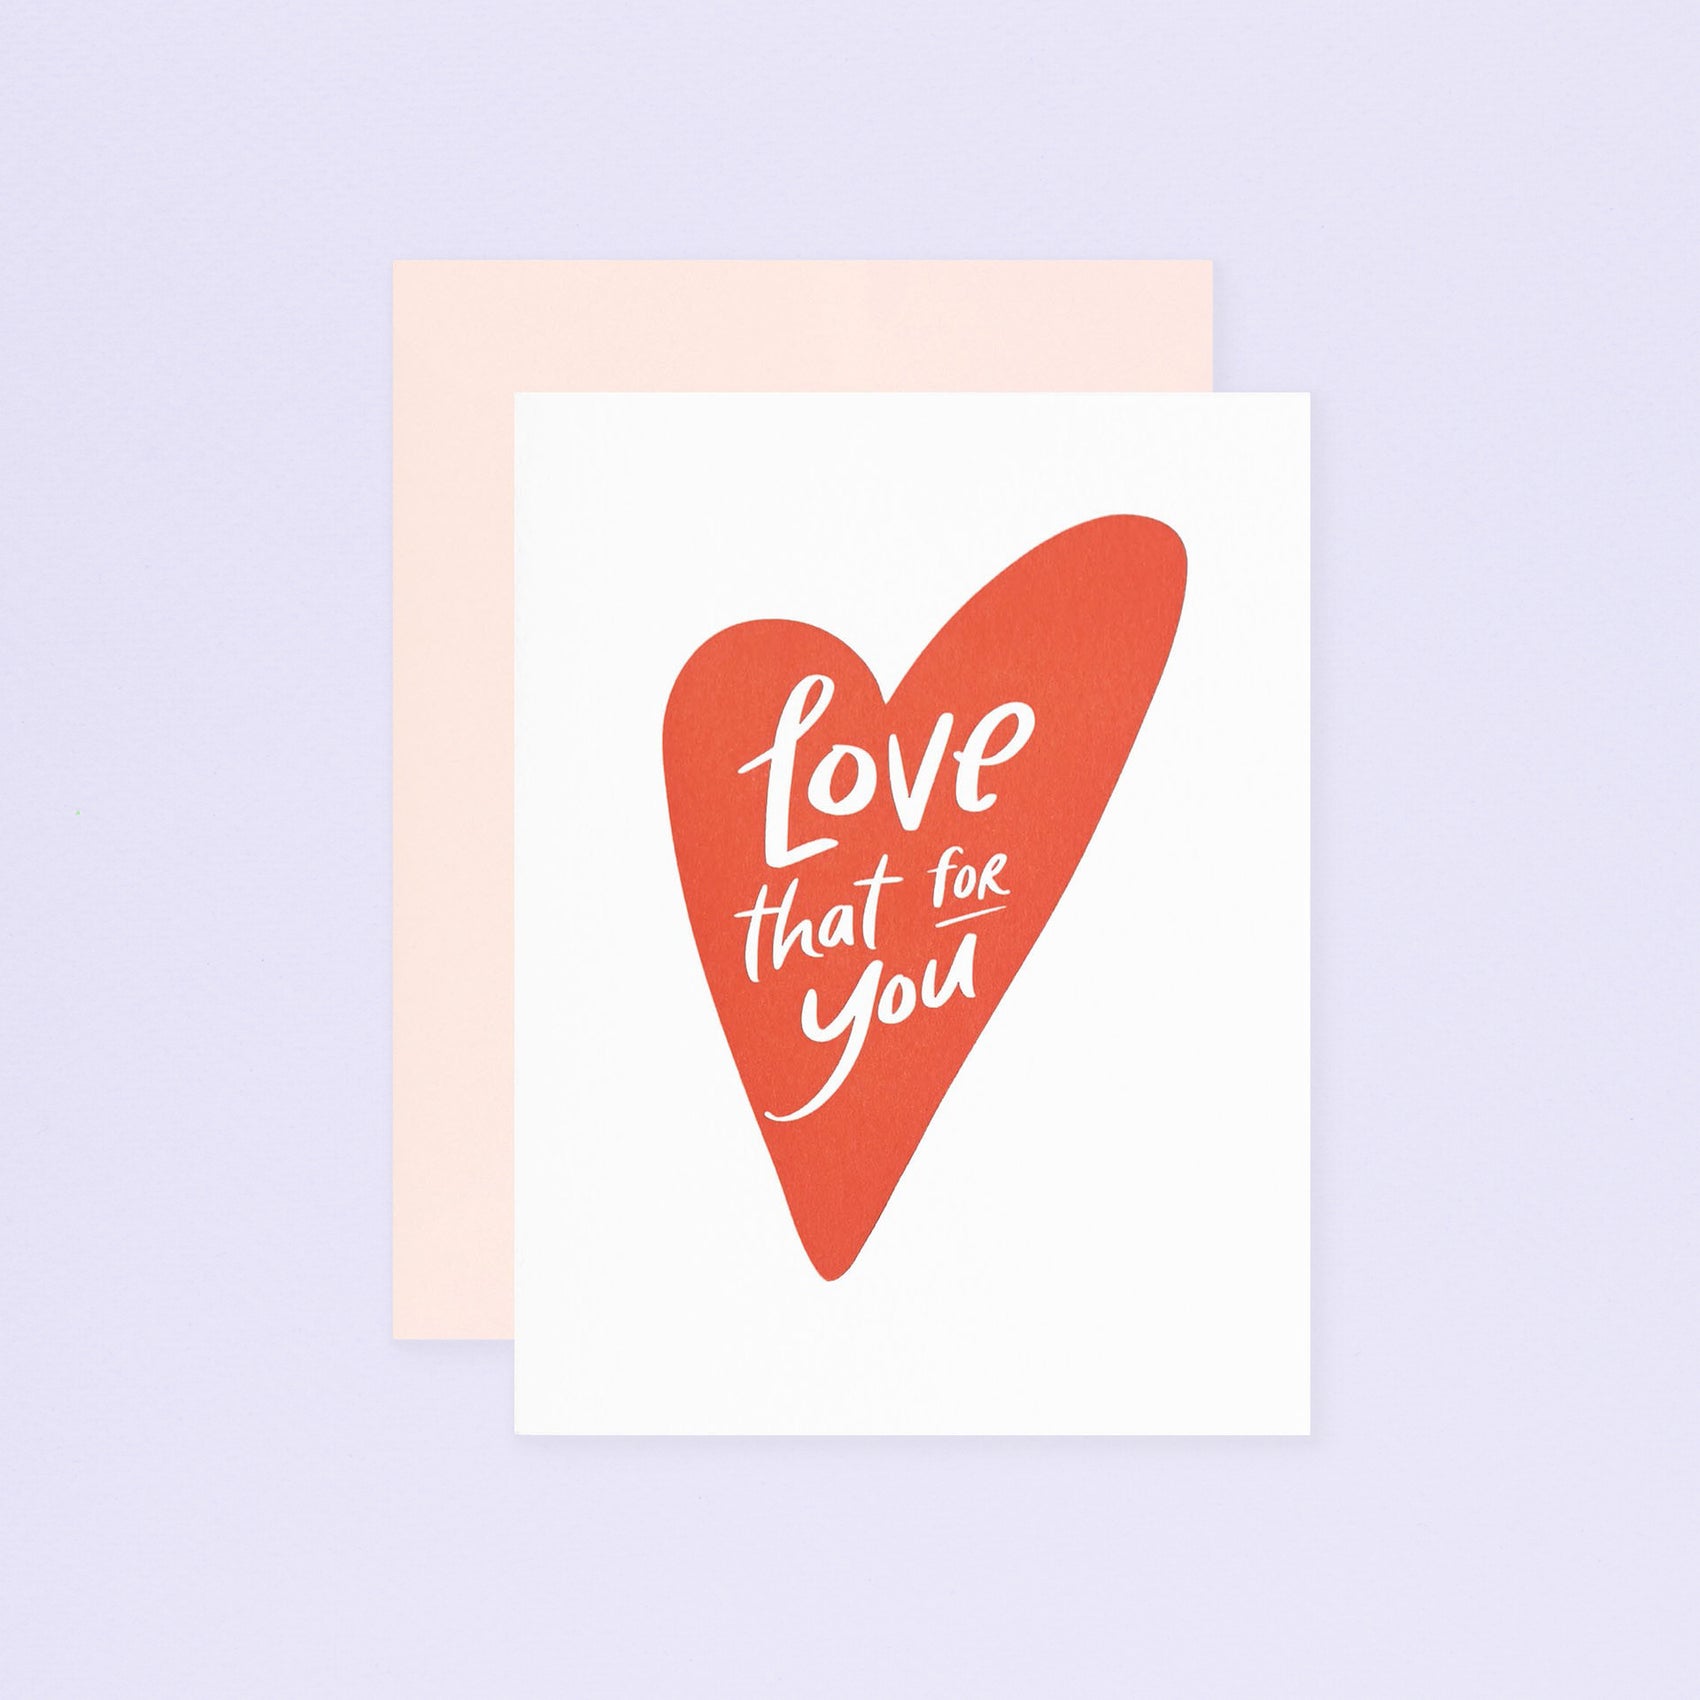 Love That for You Greeting Card